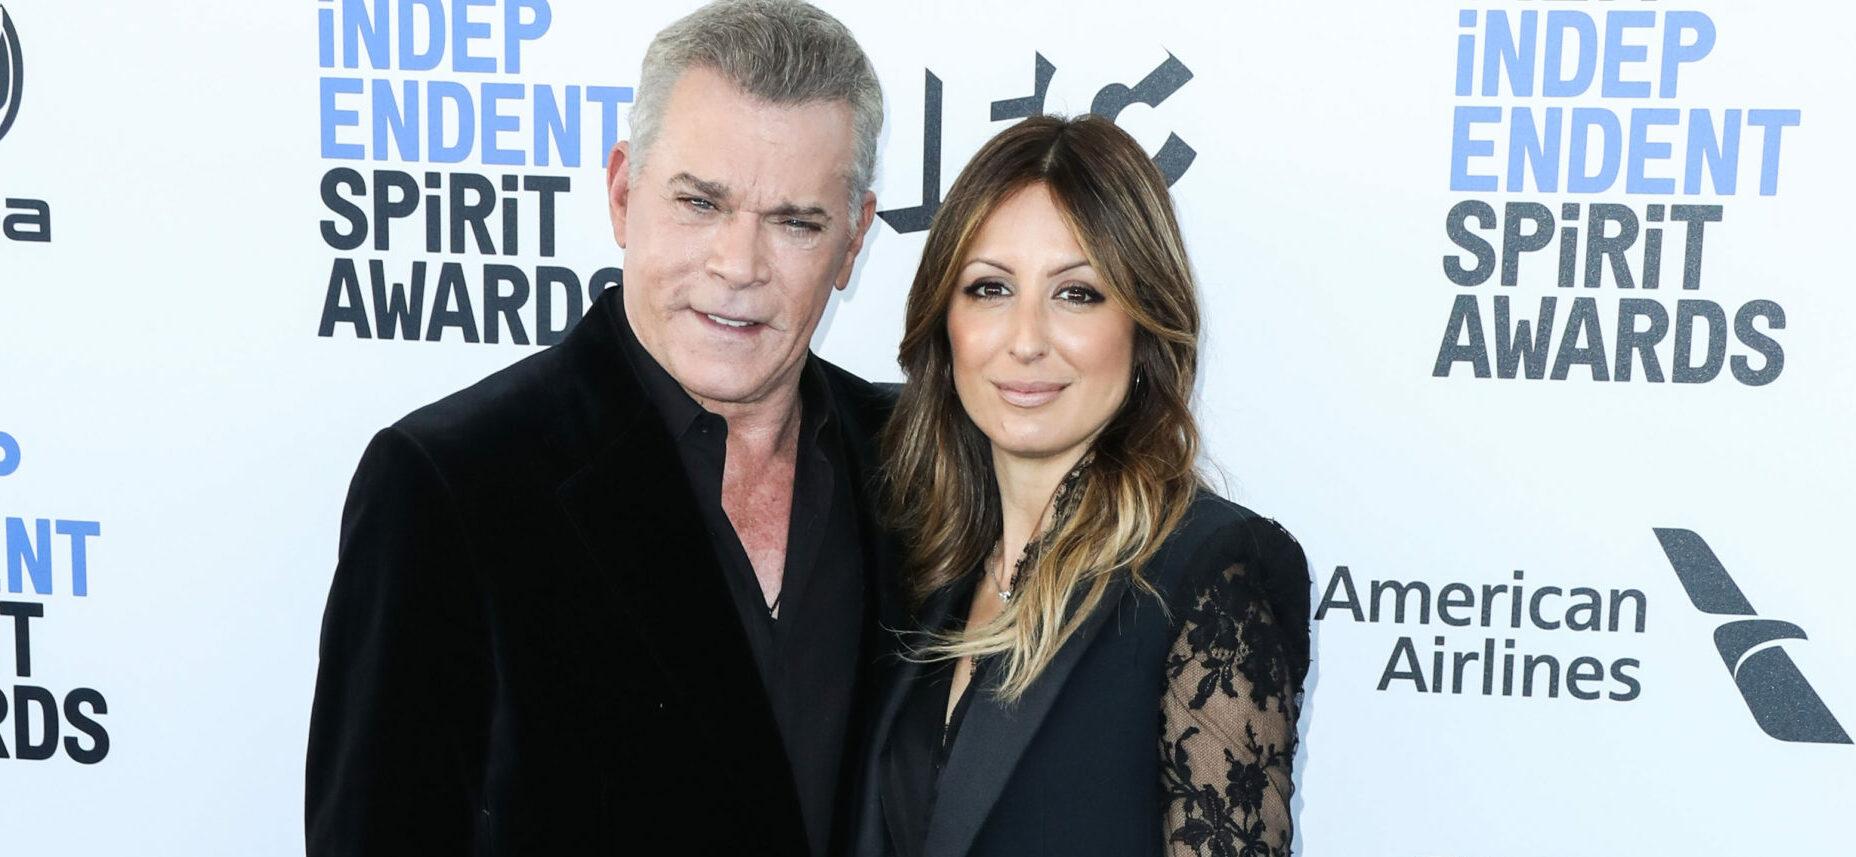 Ray Liotta and Jacy Nittolo arrive at the 2020 Film Independent Spirit Awards